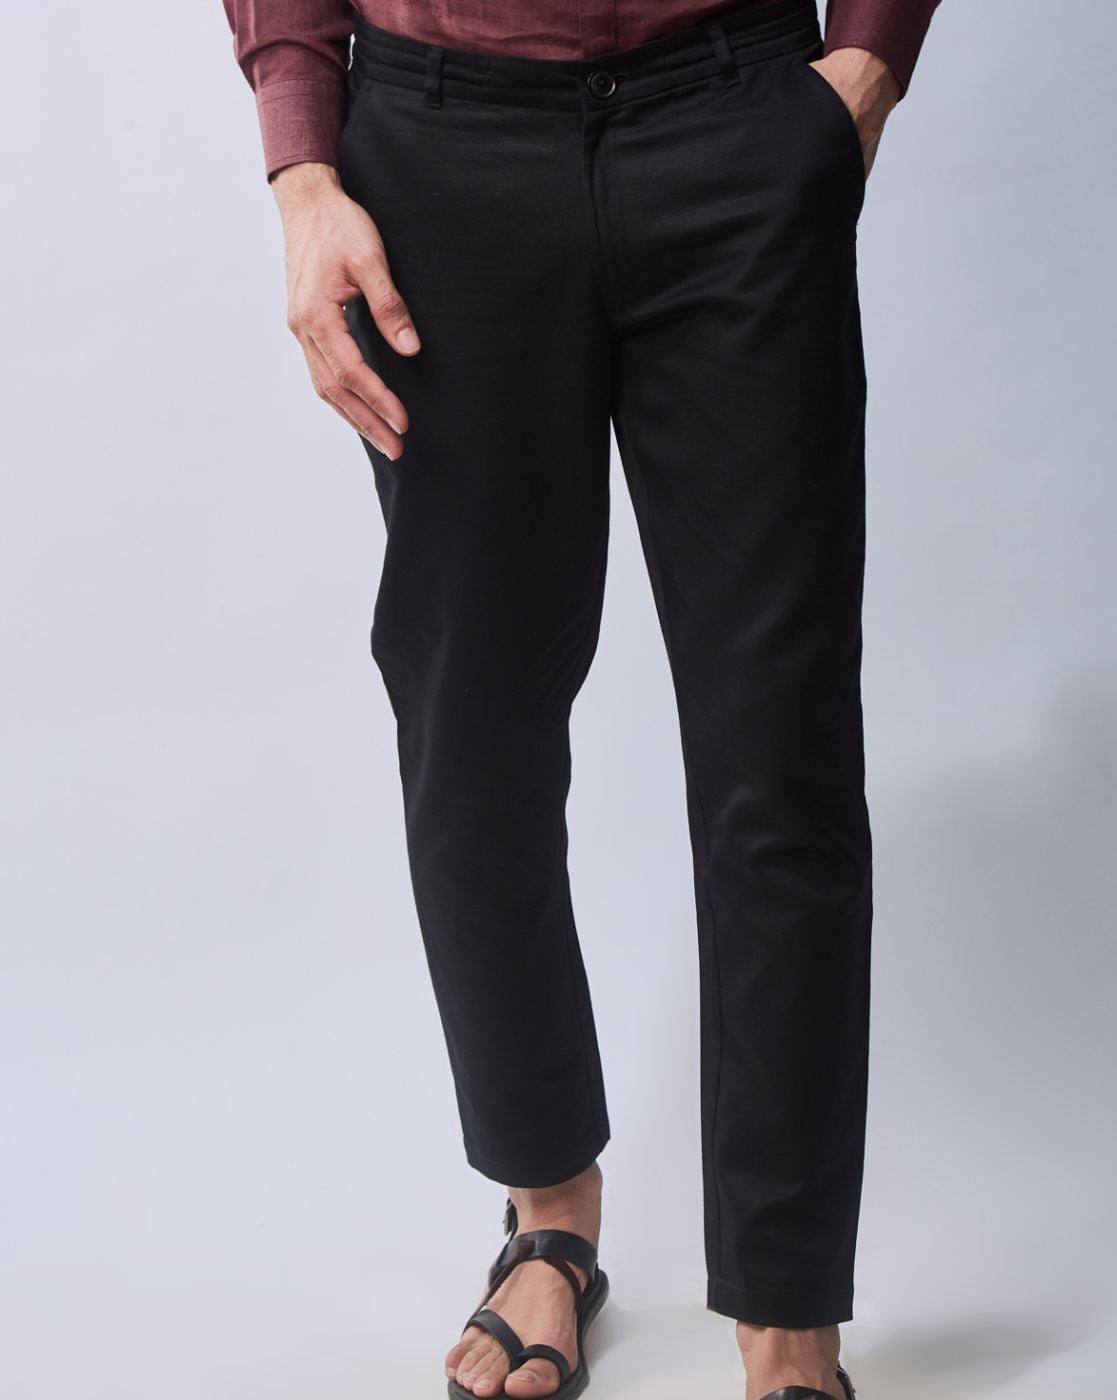 Ankle-Length Flat-Front Pants